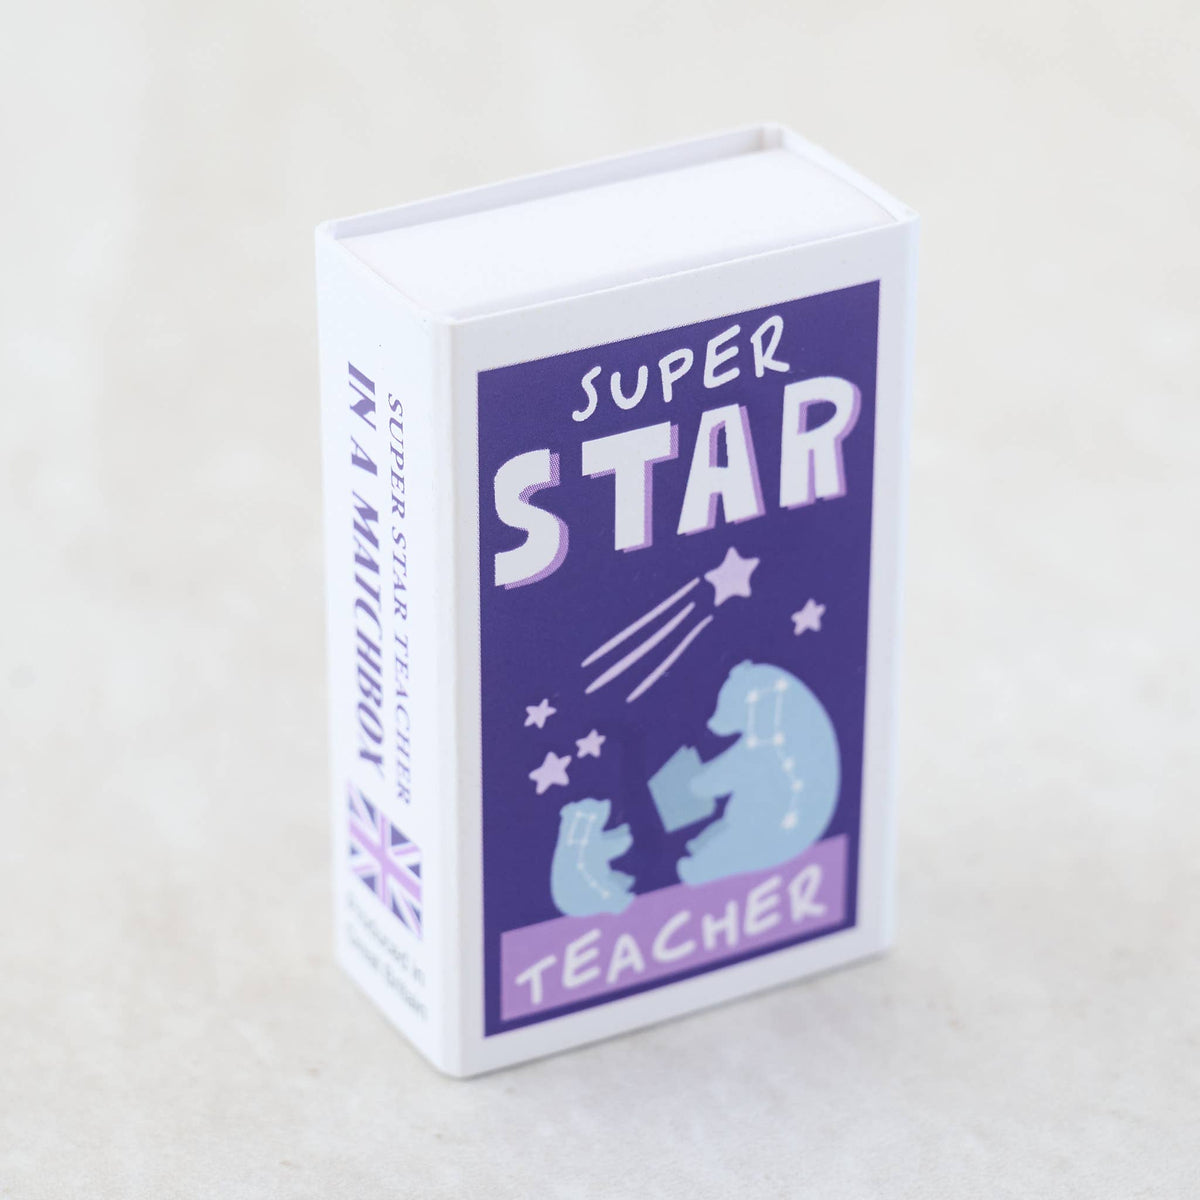 Super Star Teacher Meteorite Gift In A Matchbox-Marvling Bros Ltd-Yellow Springs Toy Company